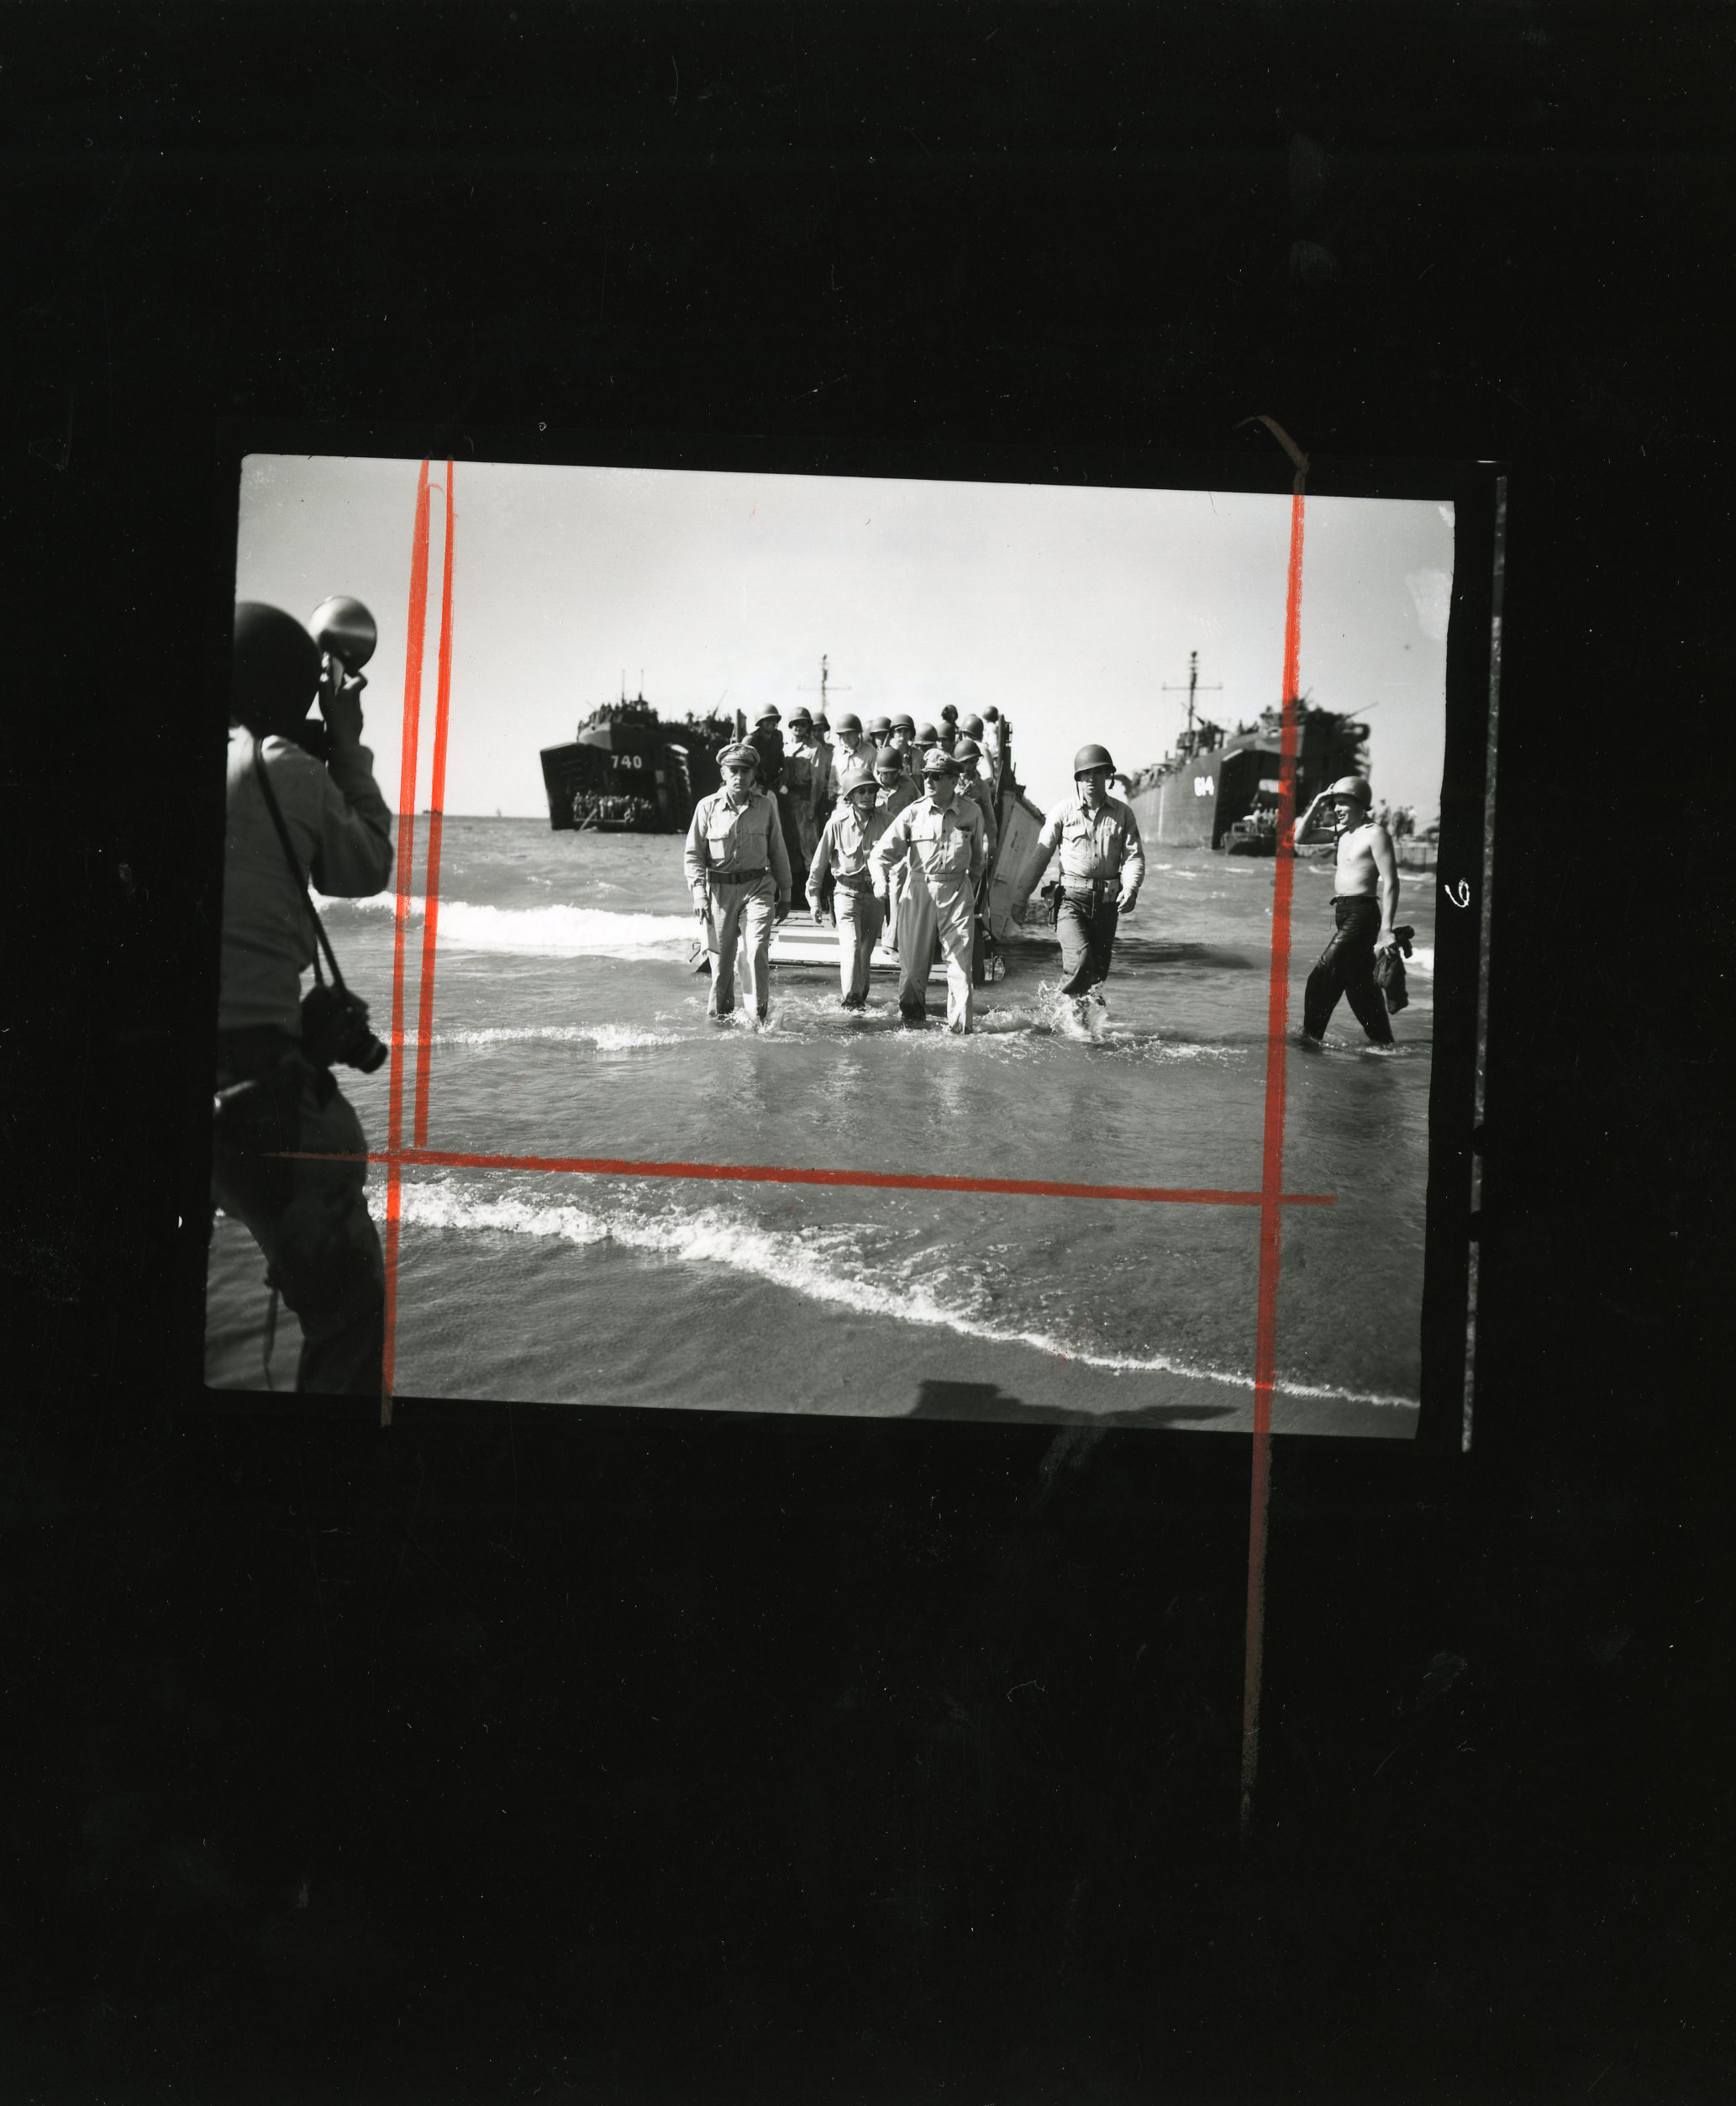 A contact sheet showing a crop of the famous picture.